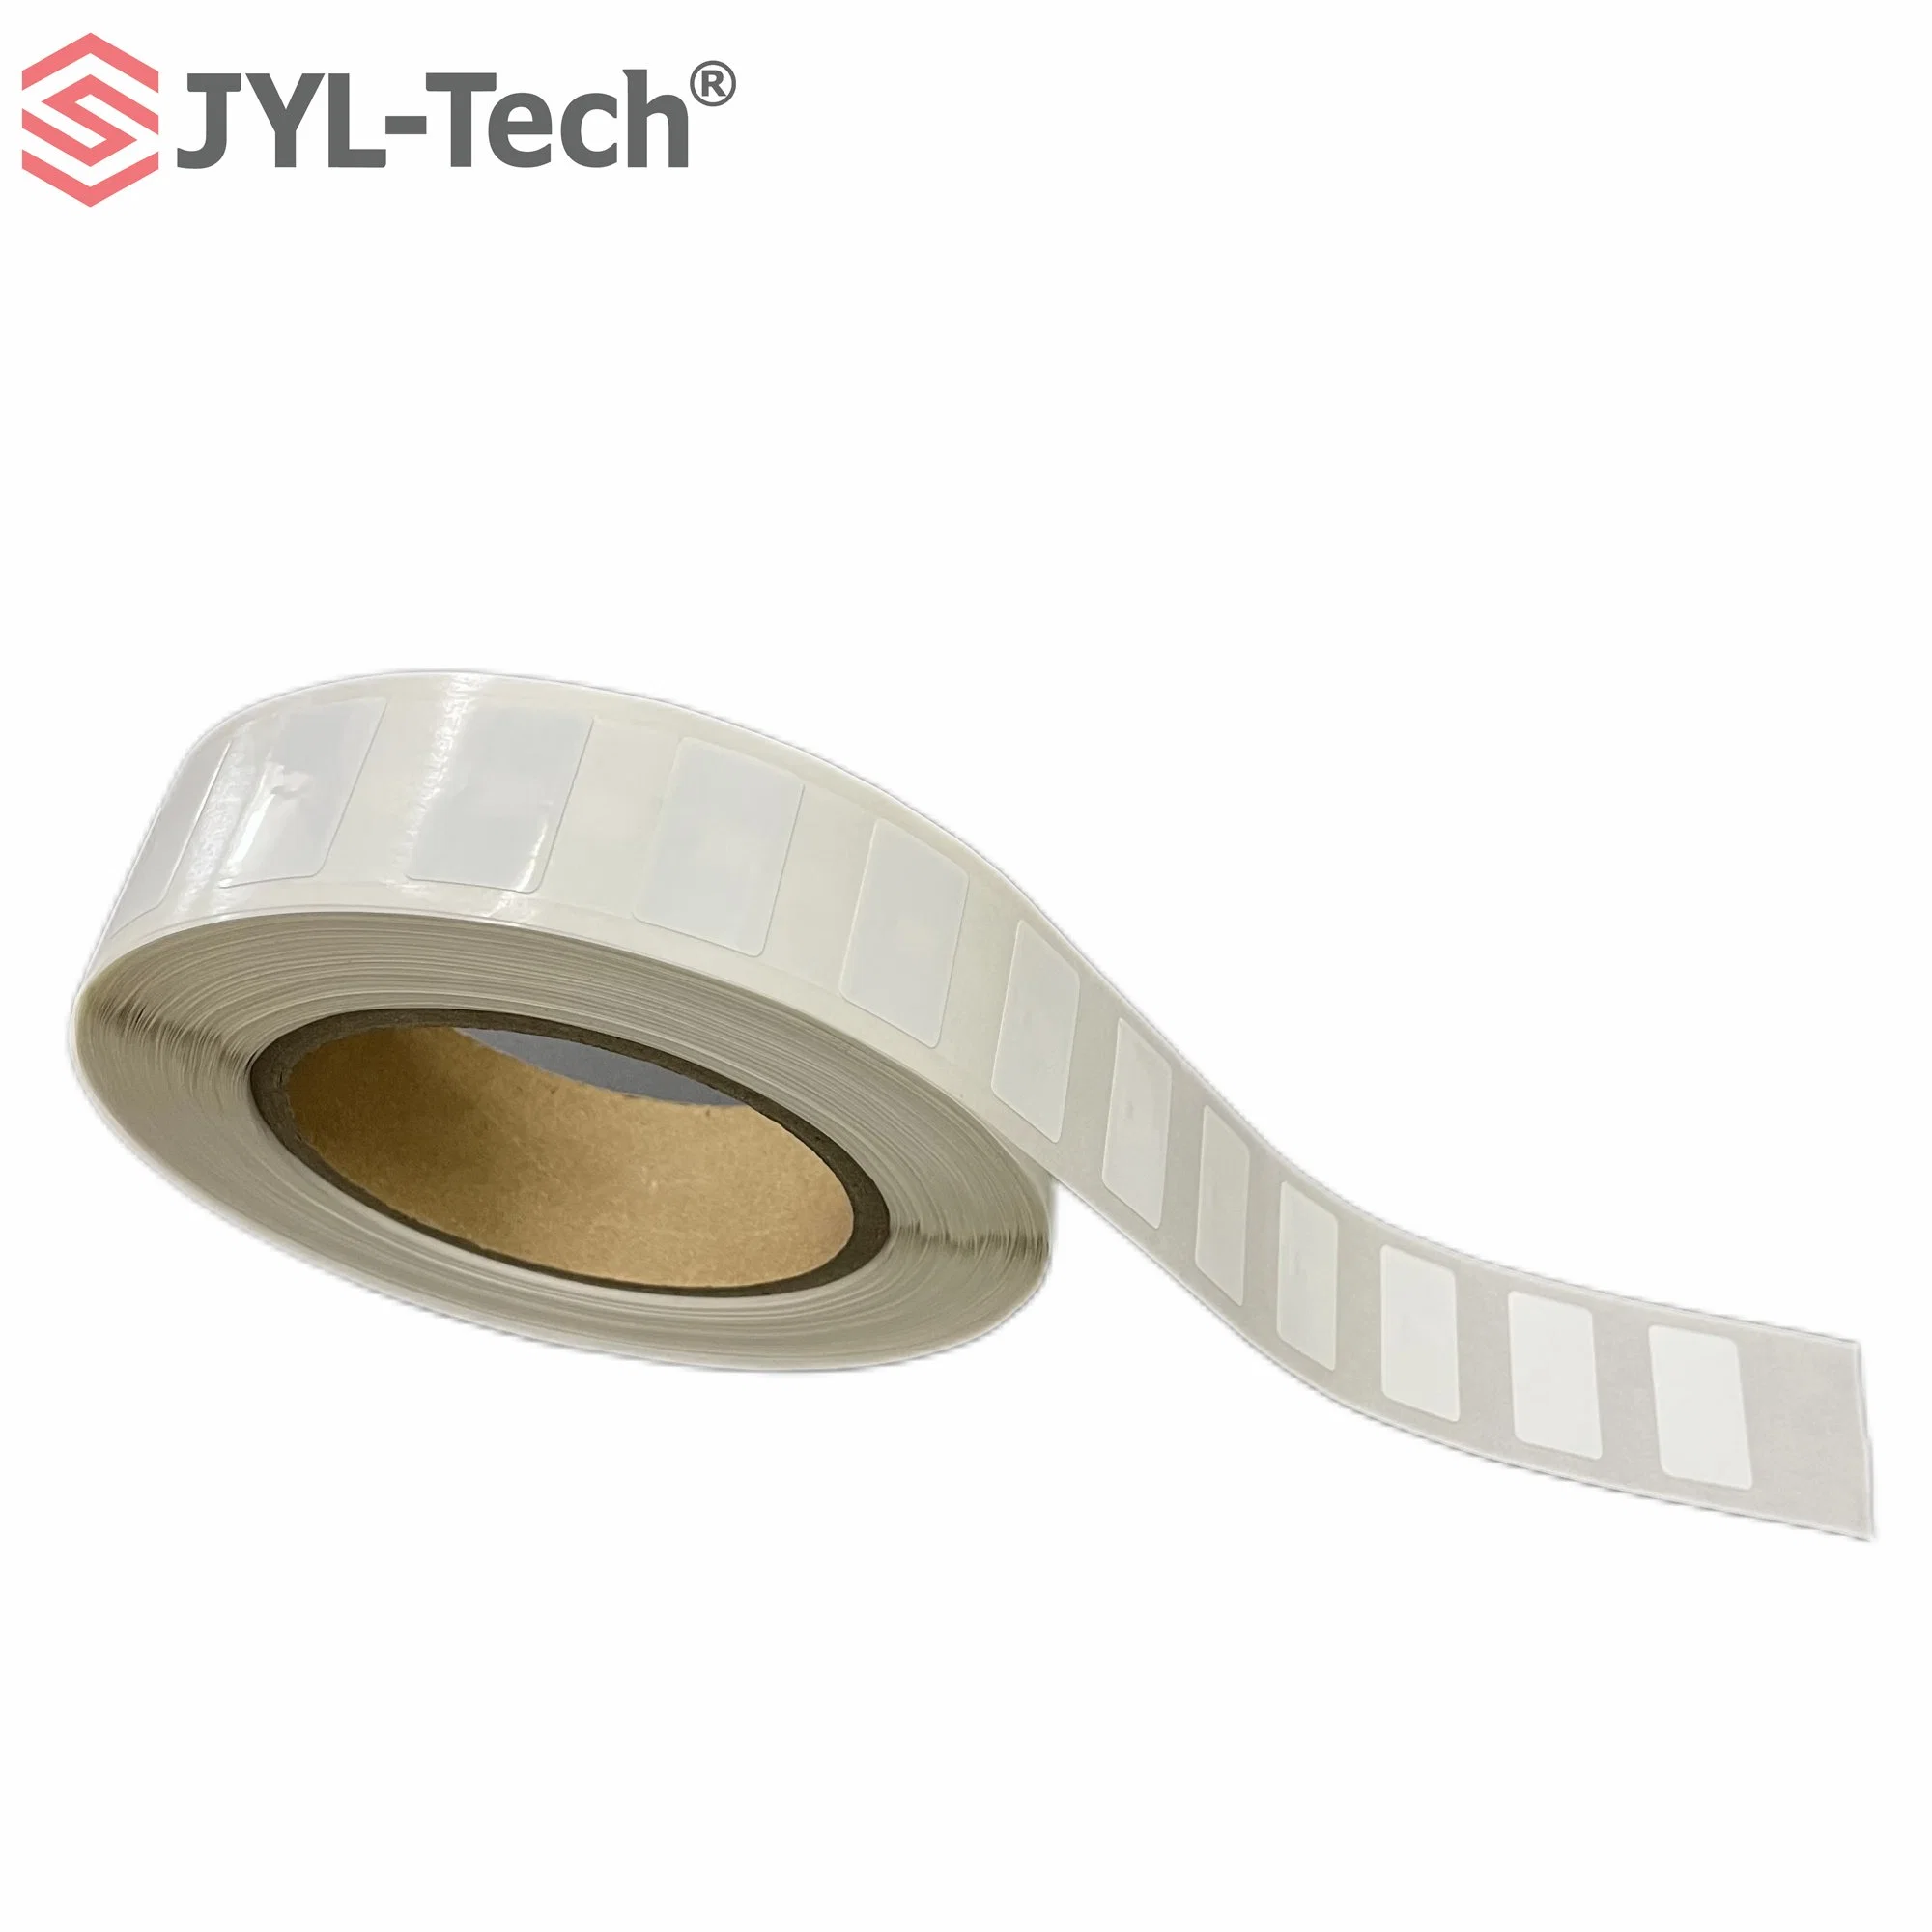 Recycle Clothing Apparel UHF RFID Garment Paper Tag for Clothing Apparel